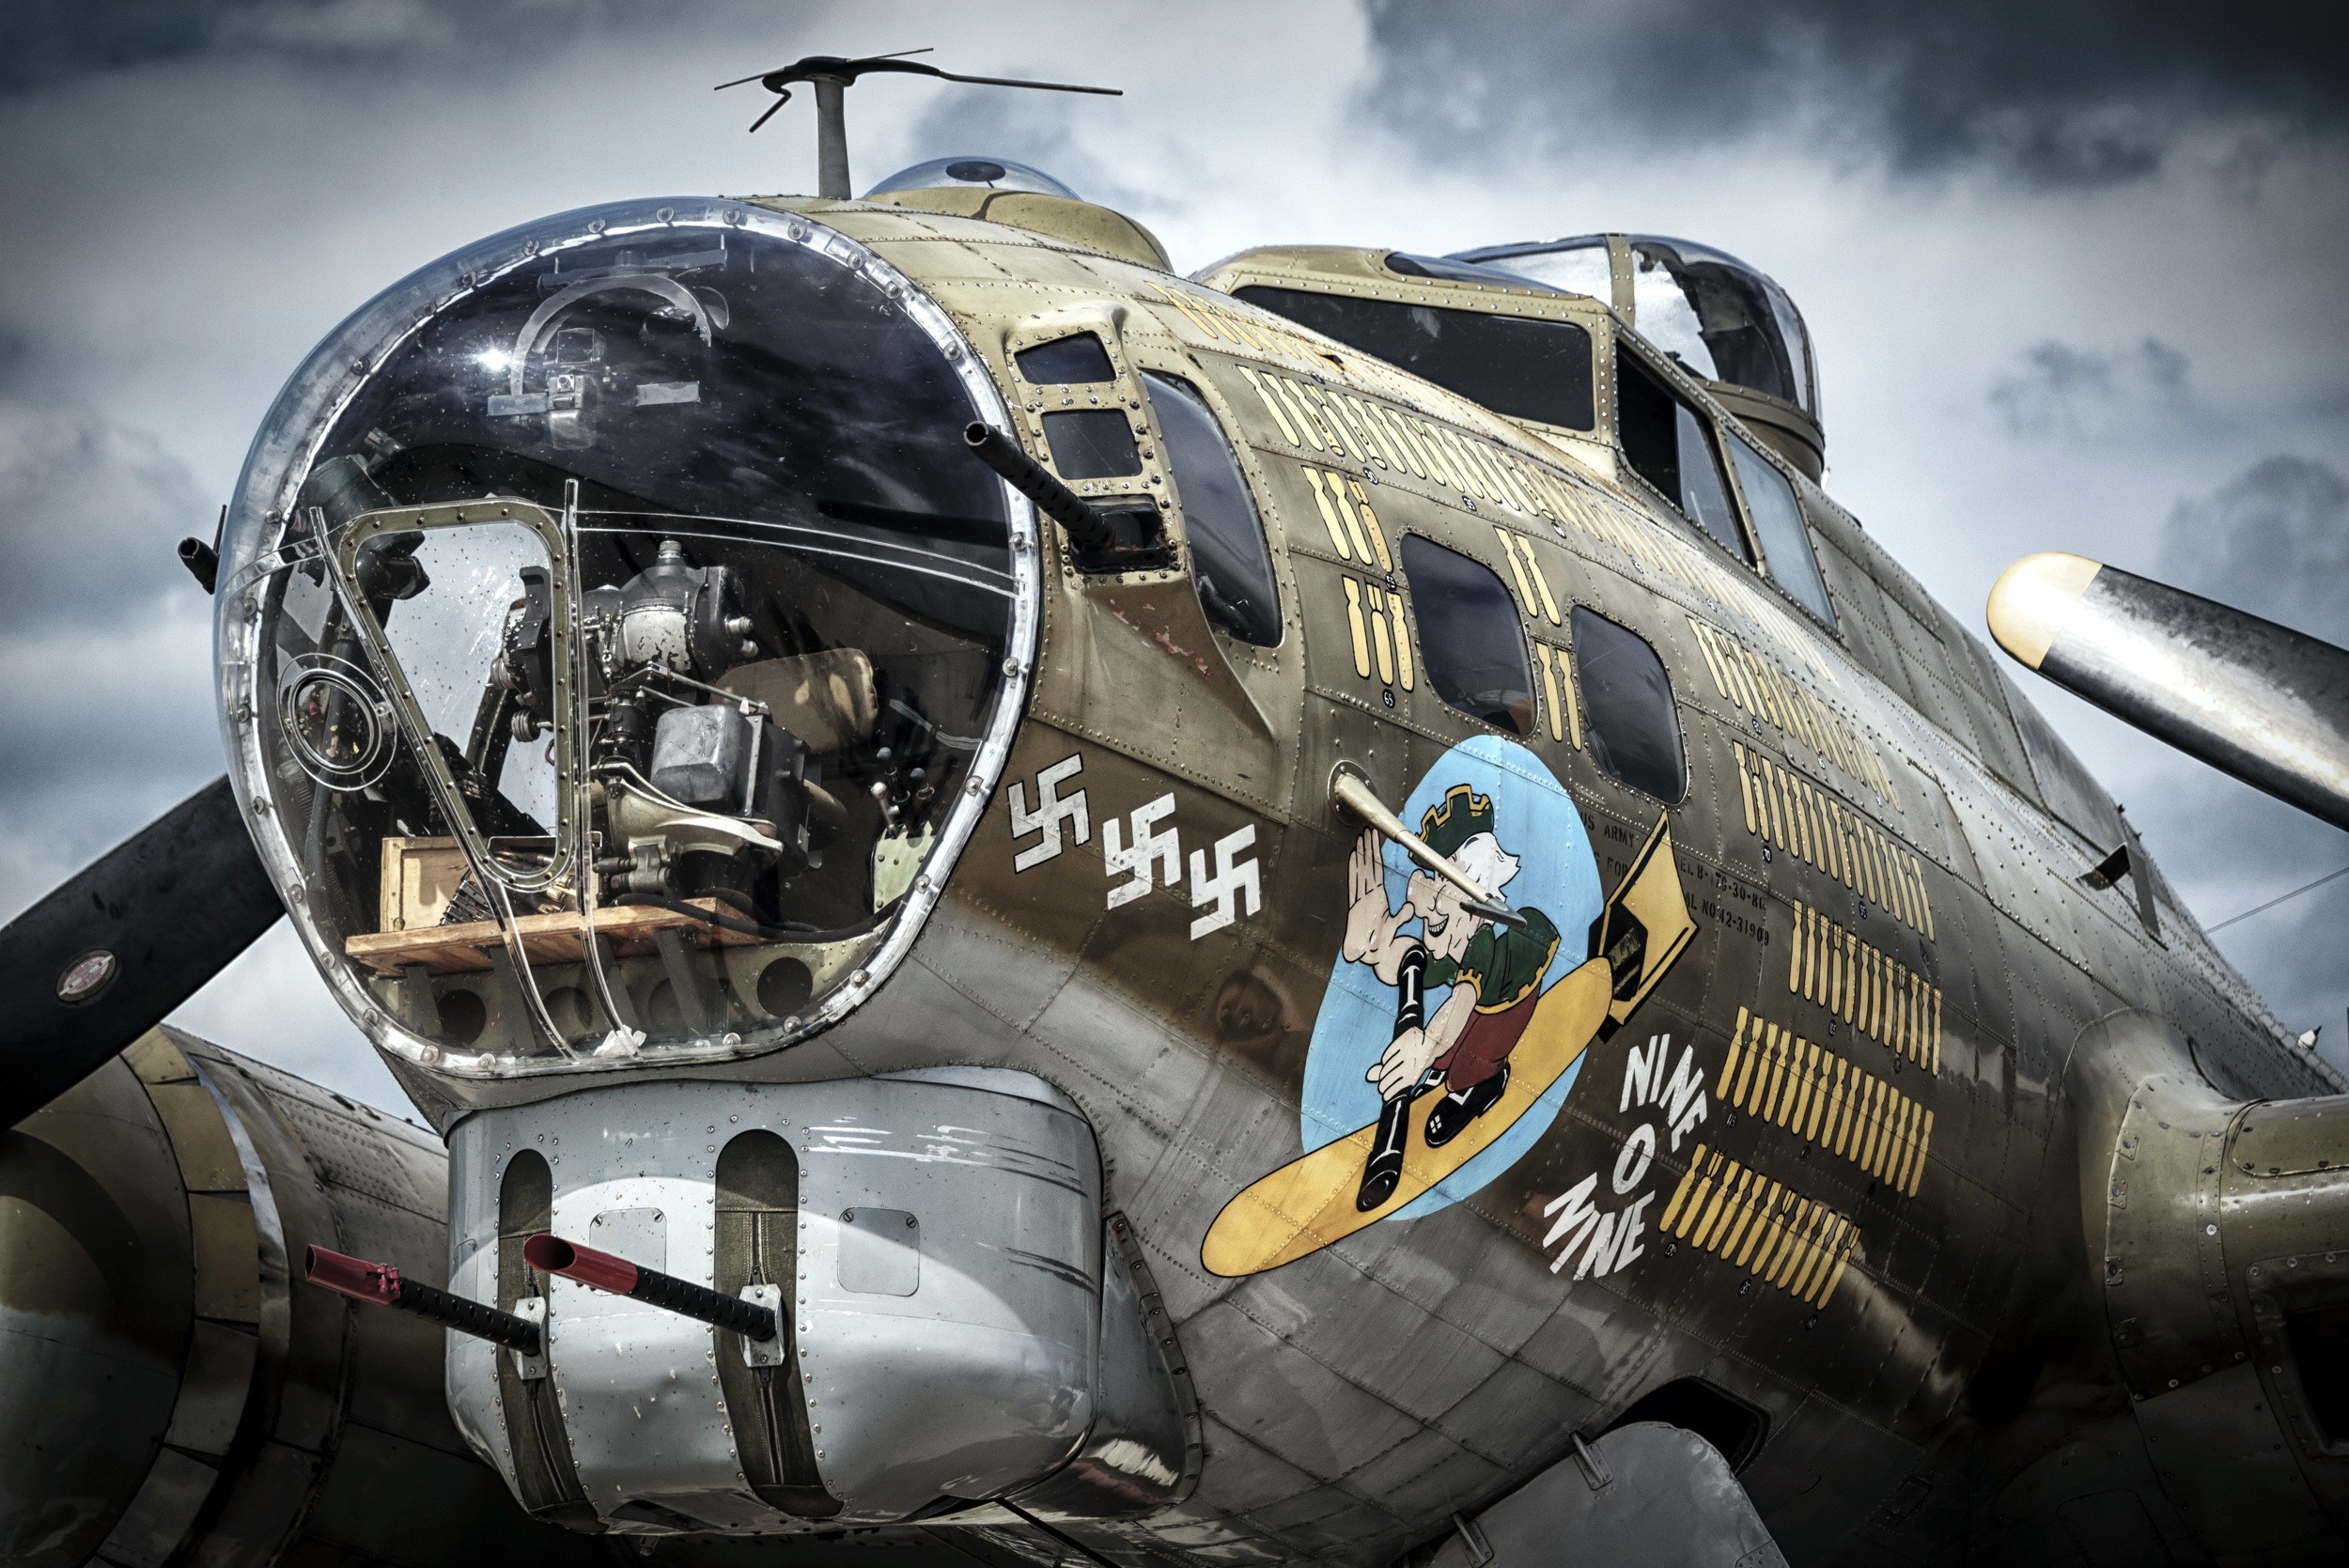 General 2500x1669 Boeing B-17 Flying Fortress military vehicle vehicle military aircraft military swastika American aircraft Boeing World War II aircraft clouds sky